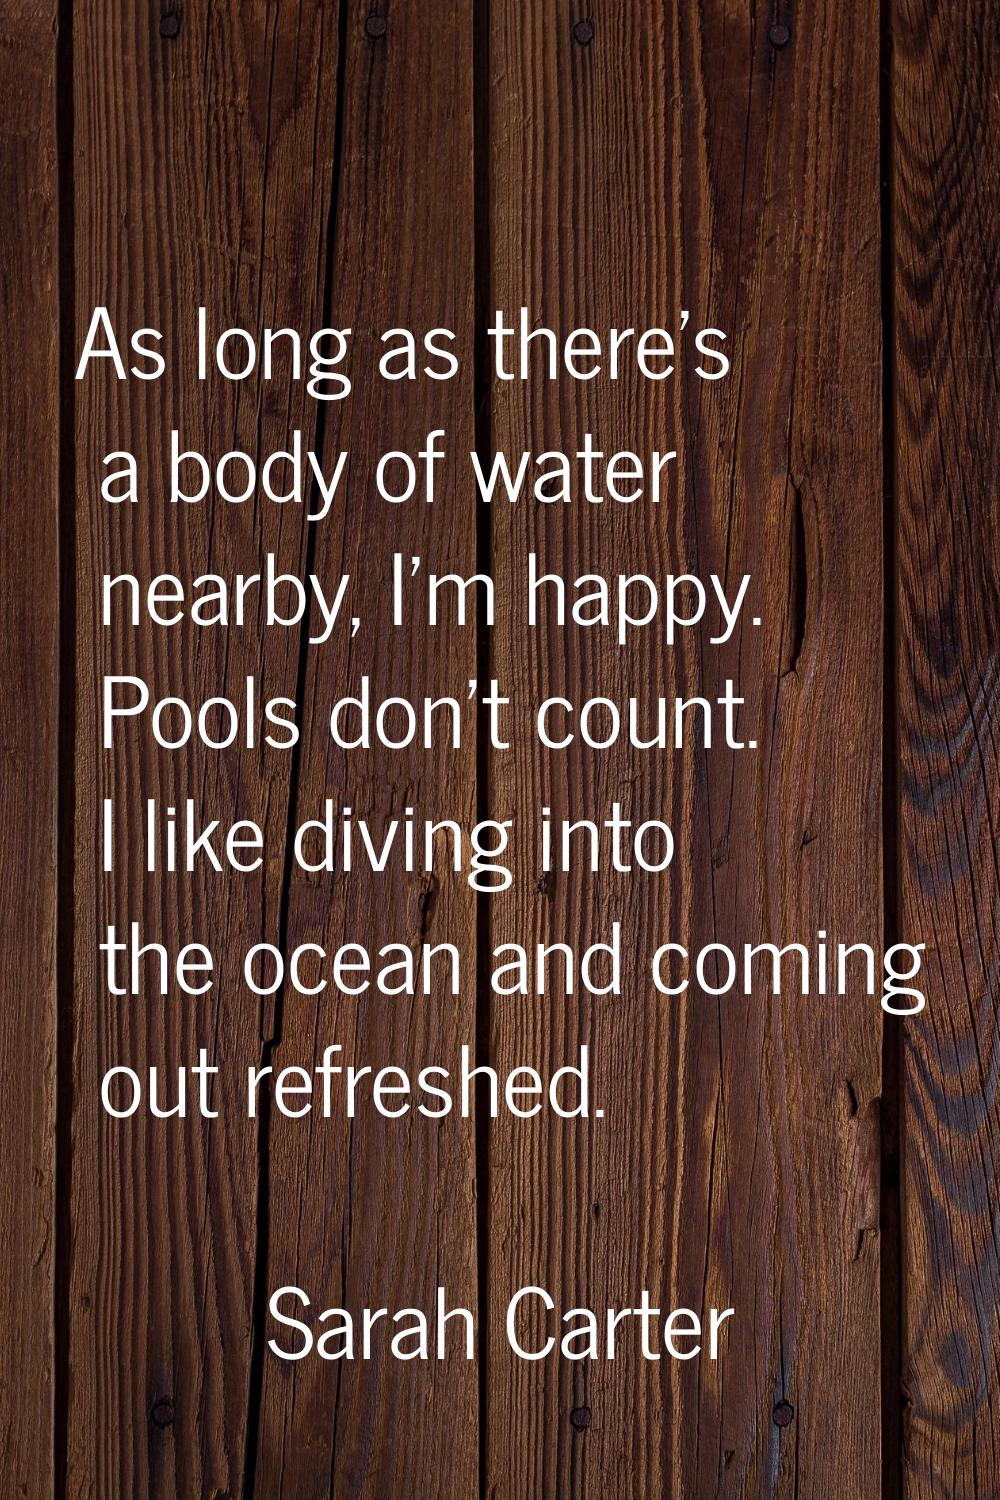 As long as there's a body of water nearby, I'm happy. Pools don't count. I like diving into the oce